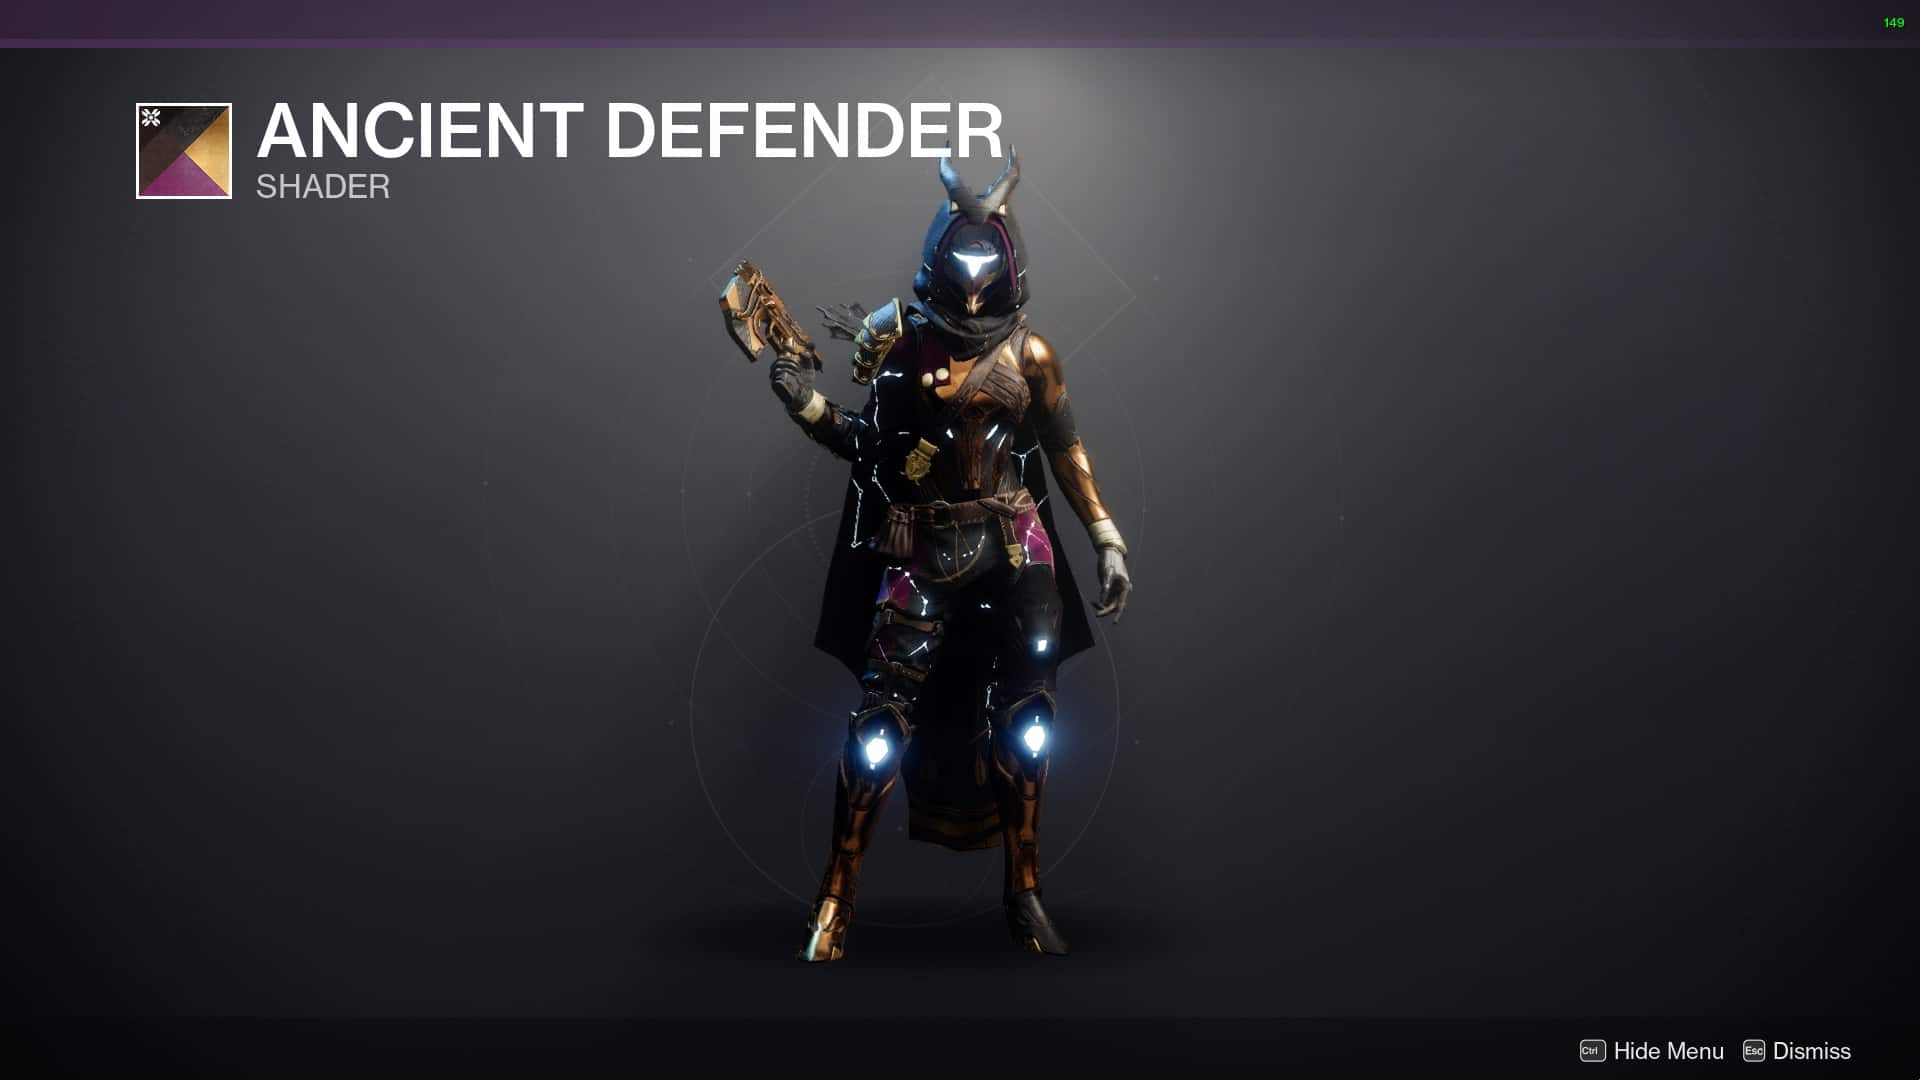 Ancient Defender Shader featured